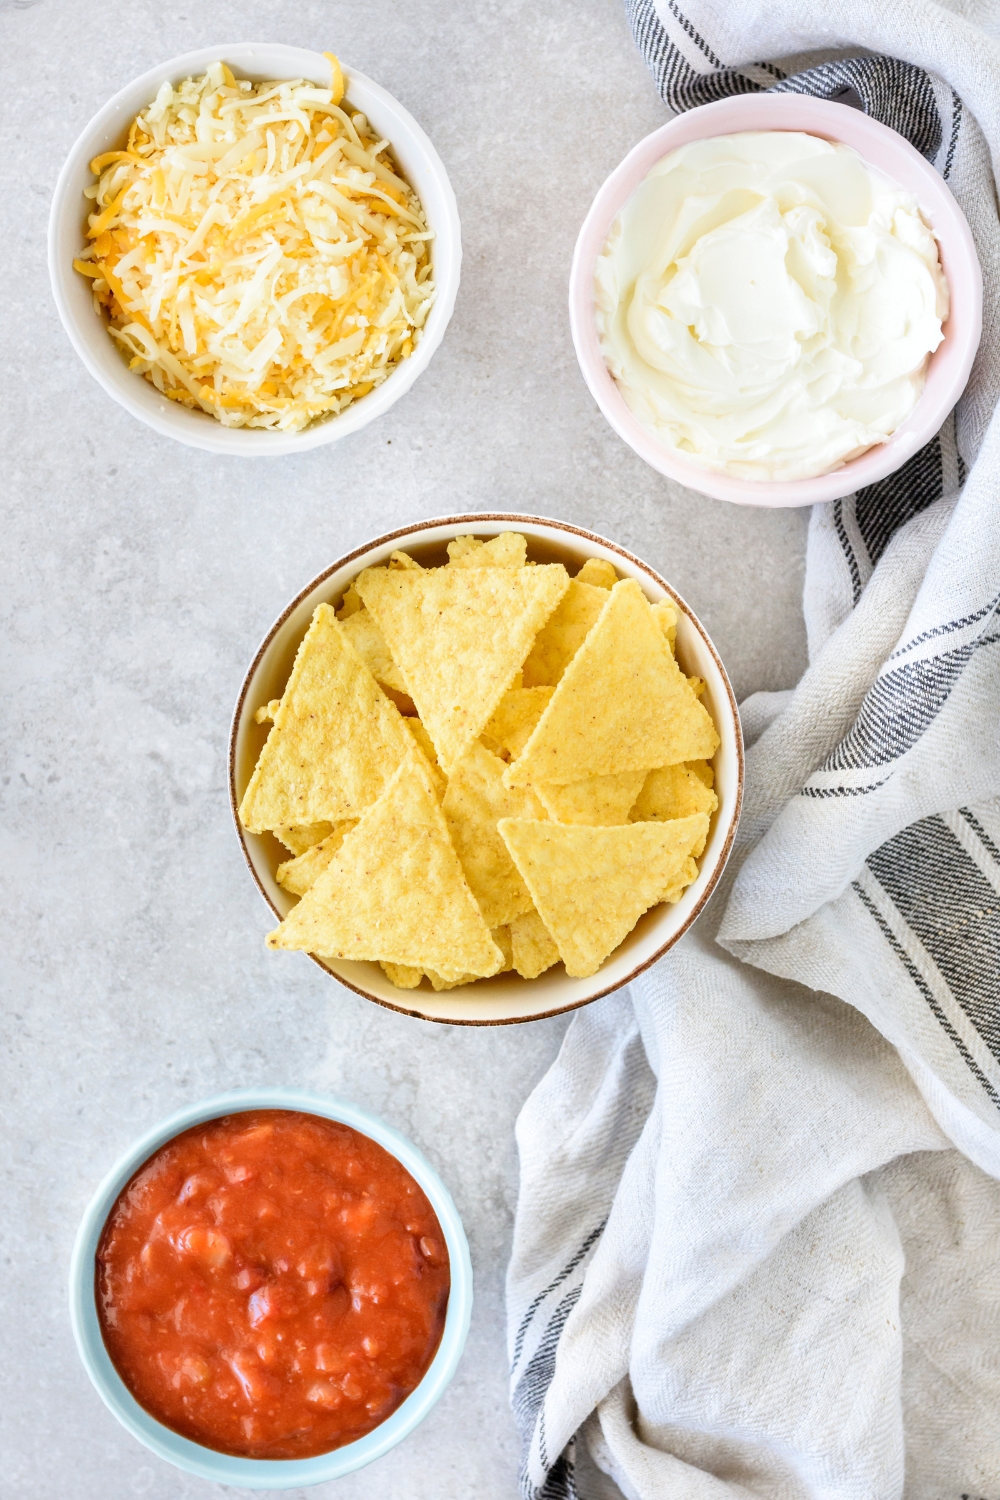 An assortment of ingredients including bowls of tortilla chips, cream cheese, shredded cheese, and chili.